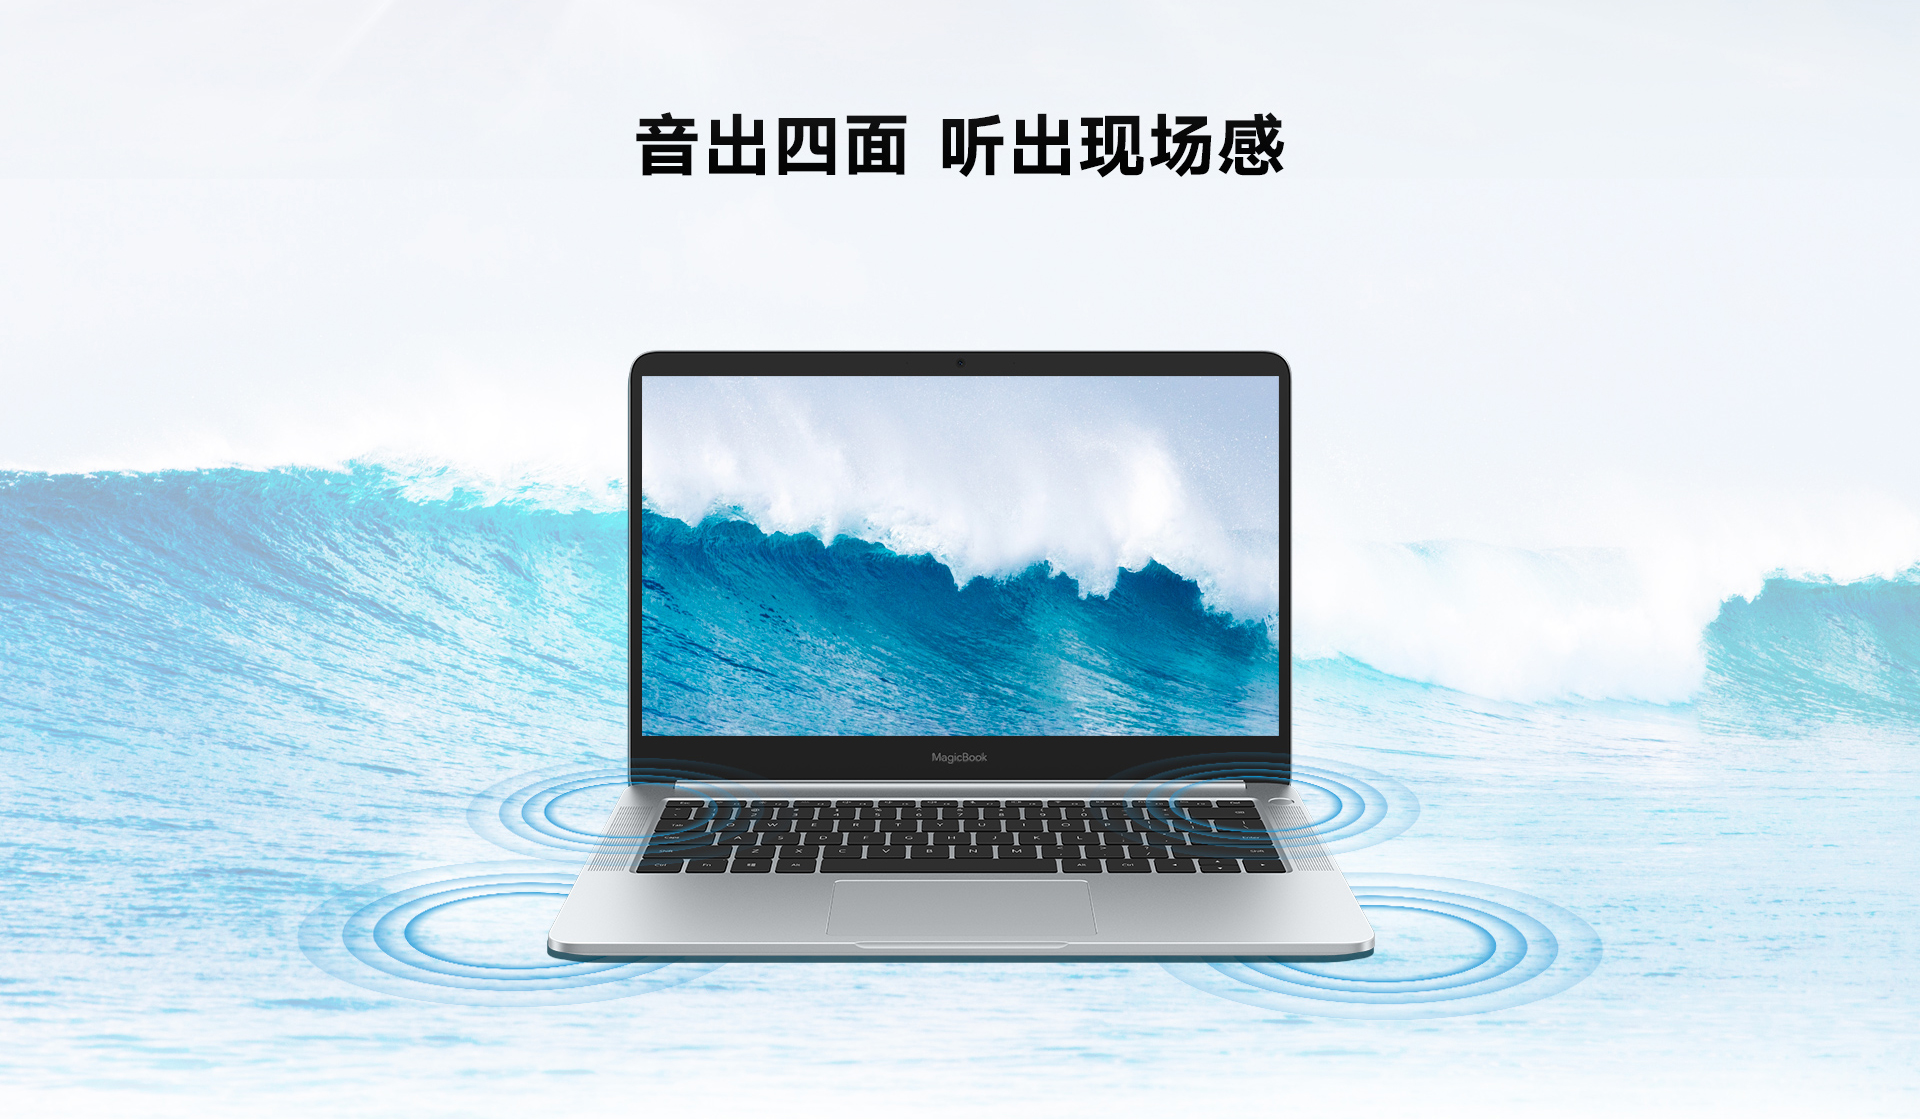 Pc manager honor magicbook. Ноутбук хонор 2019. Honor MAGICBOOK 14 2019. Ноутбук Huawei Honor MAGICBOOK 14. Ноутбук хонор Ryzen 7.